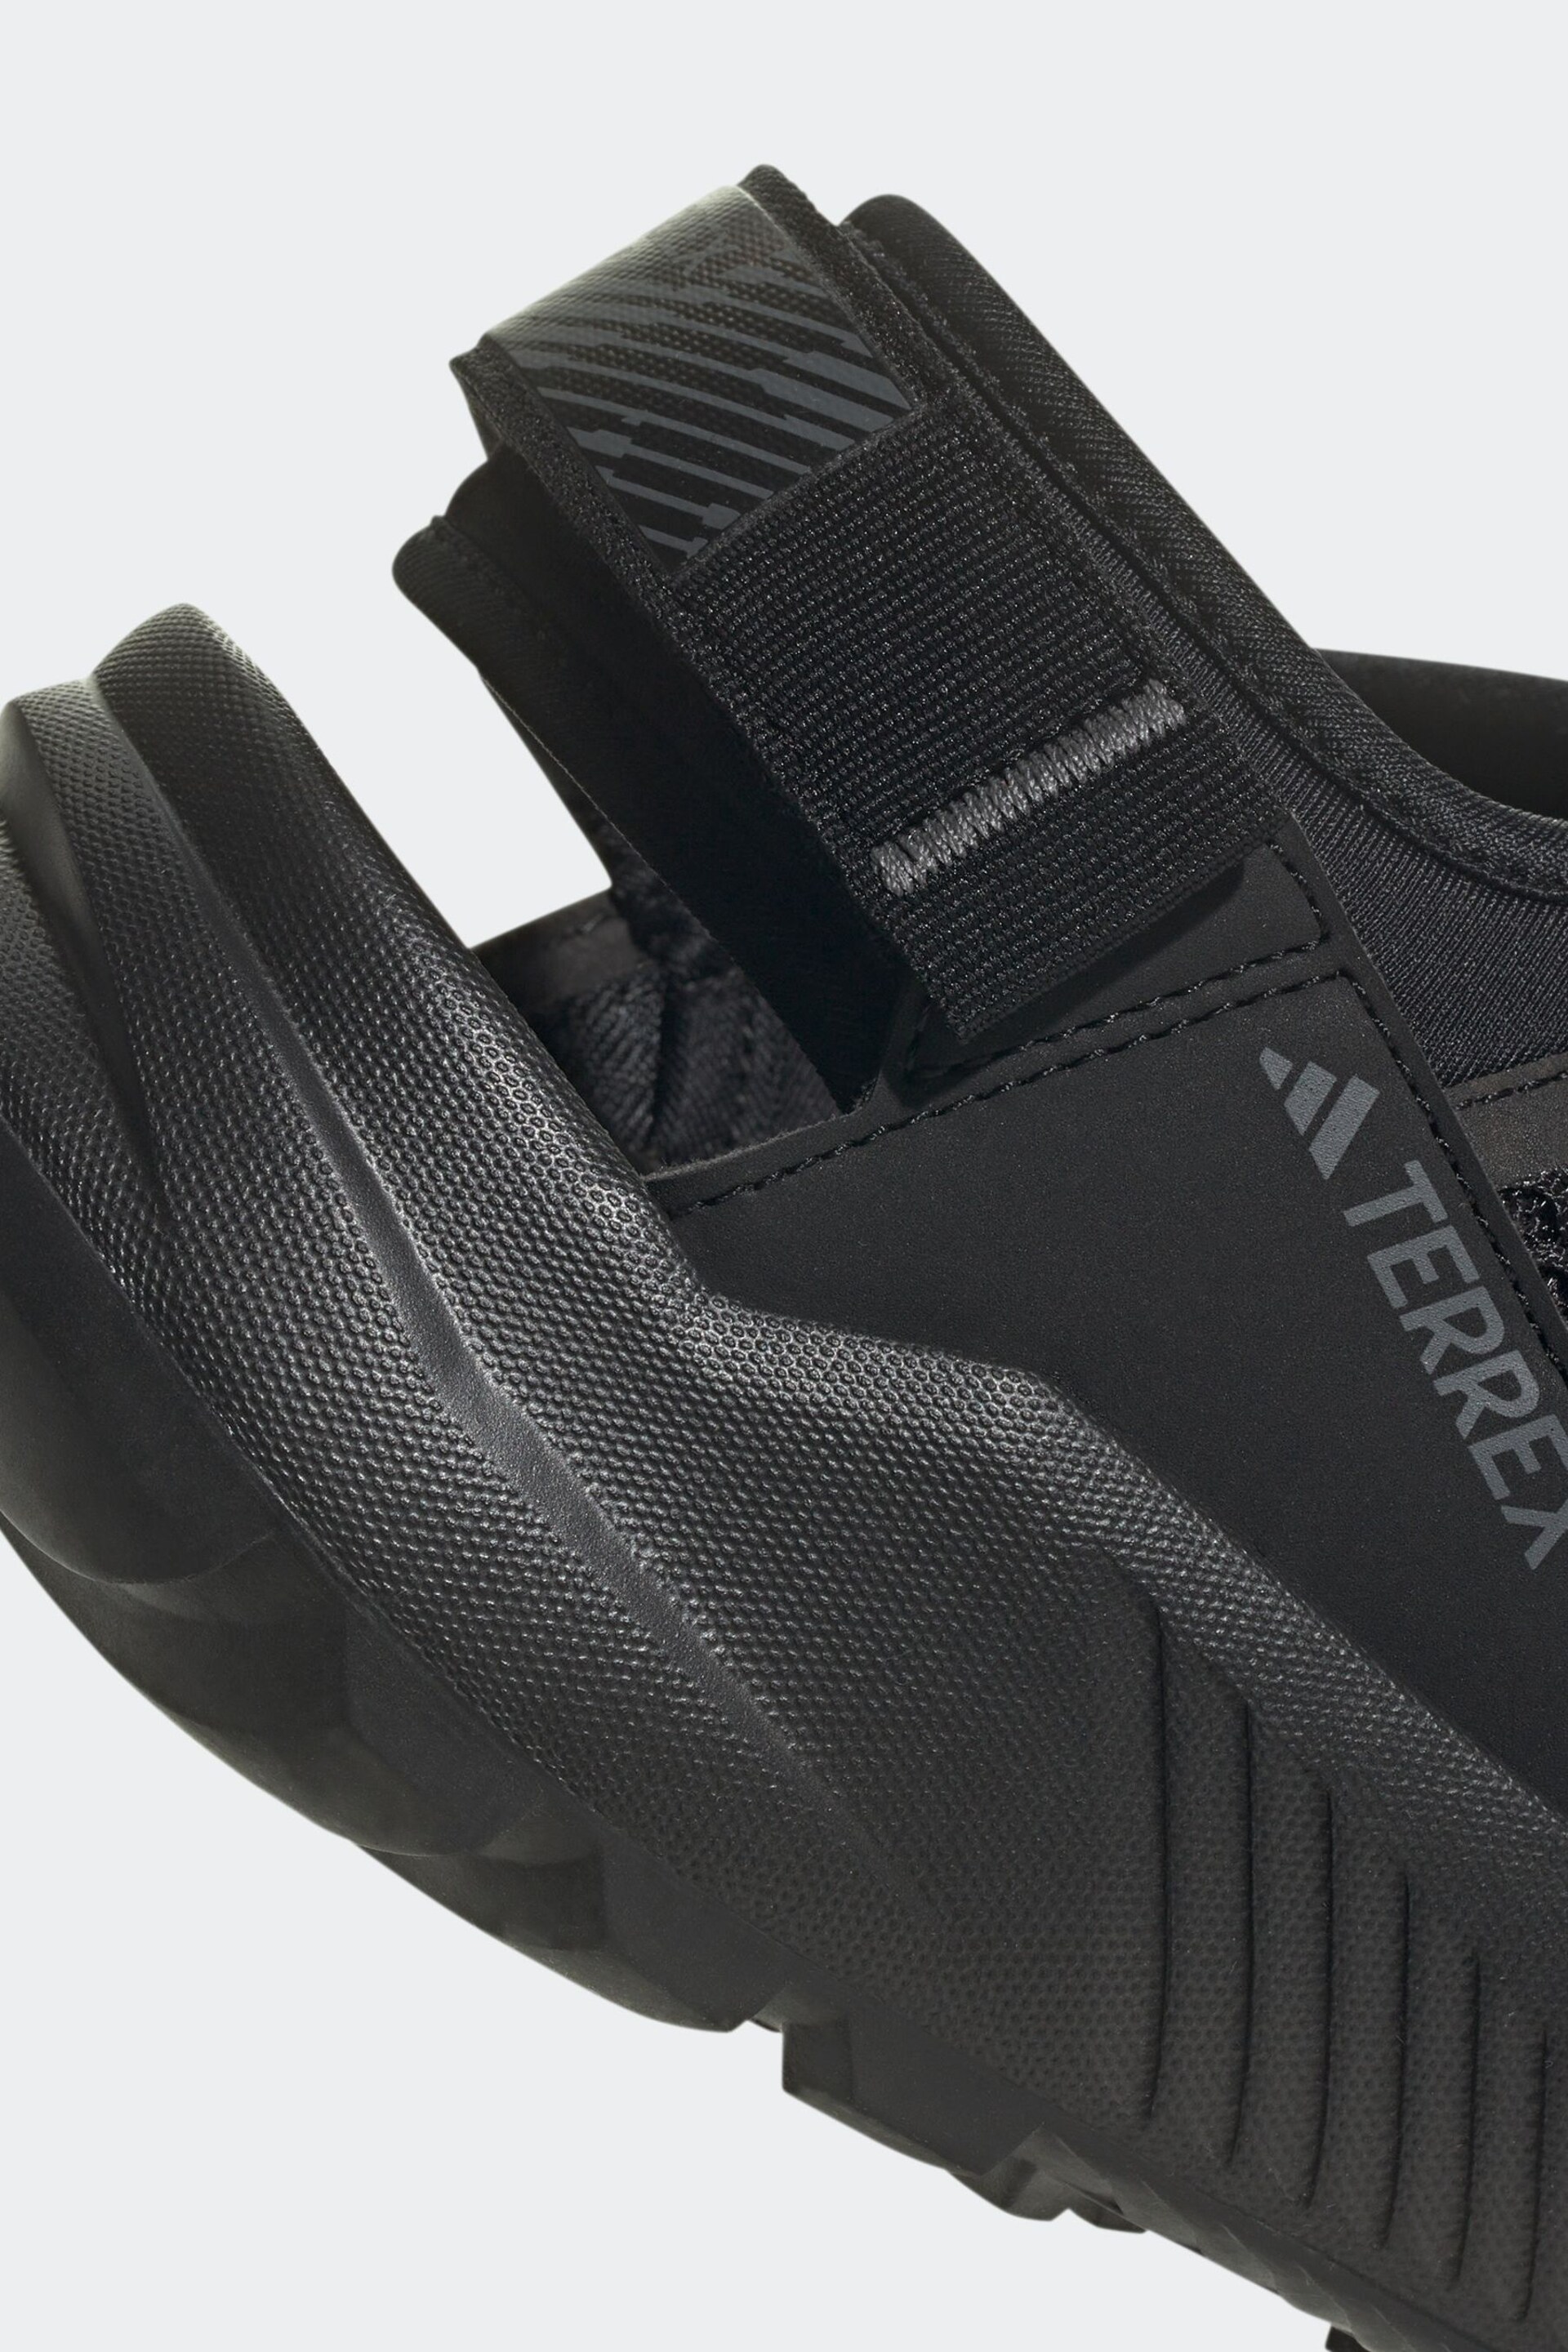 adidas Terrex Hydroterra At Sandals - Image 11 of 12